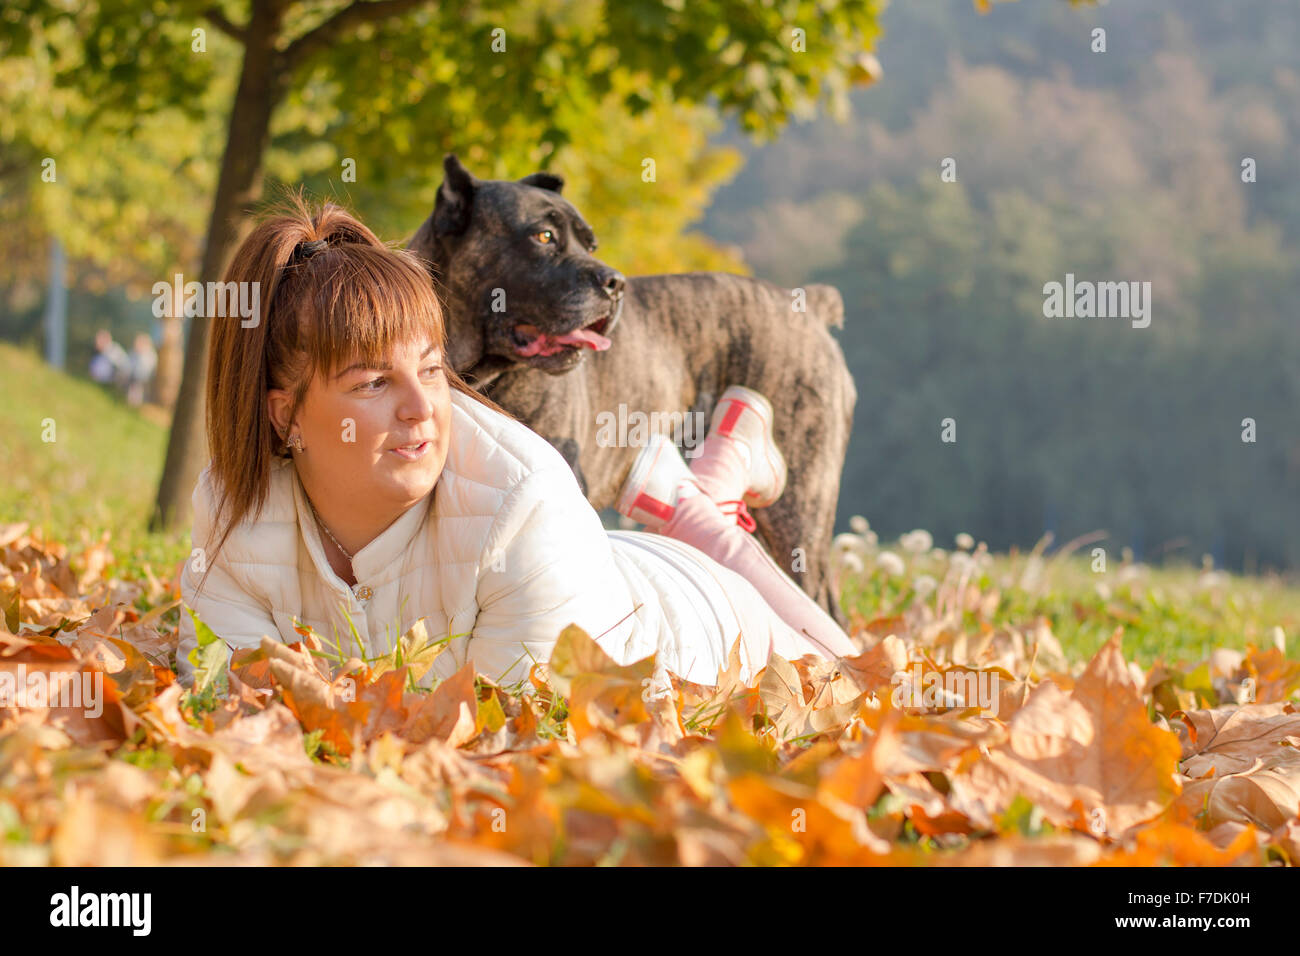 Girl and her Cane Corso dog enjoying sunny autumn day in the park Stock Photo